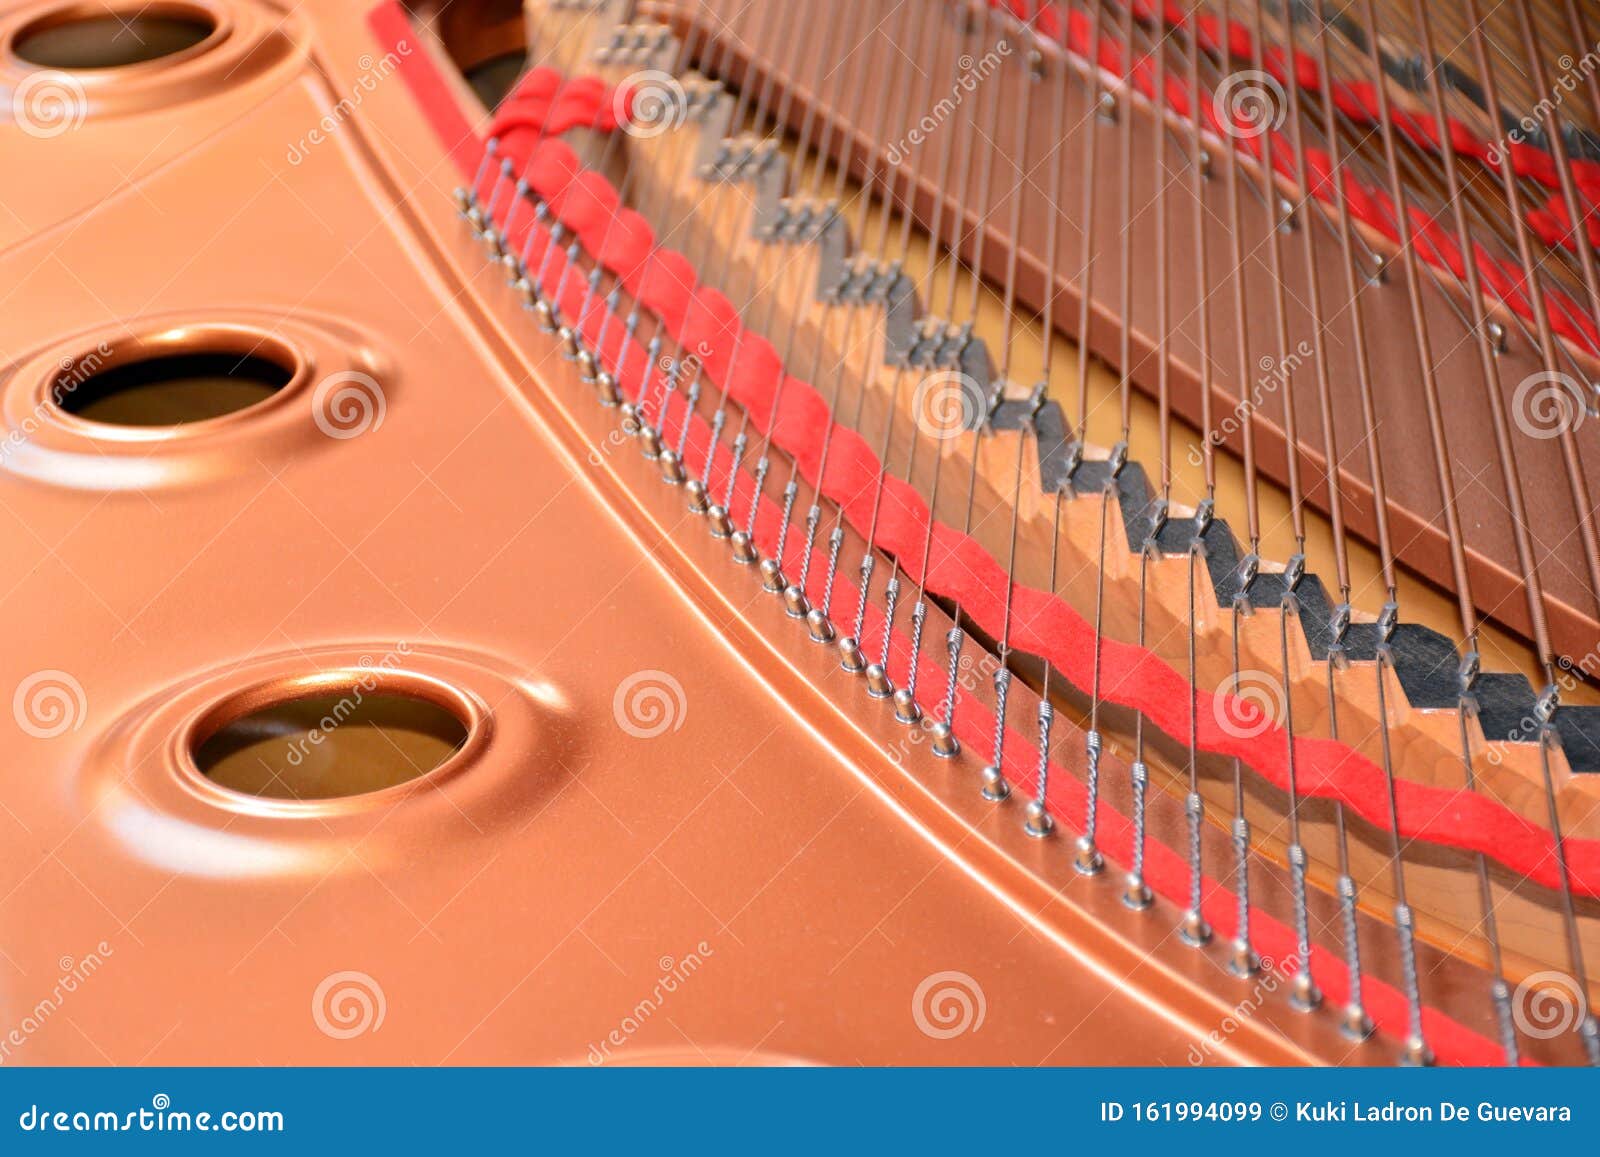 compenents inside a grand piano